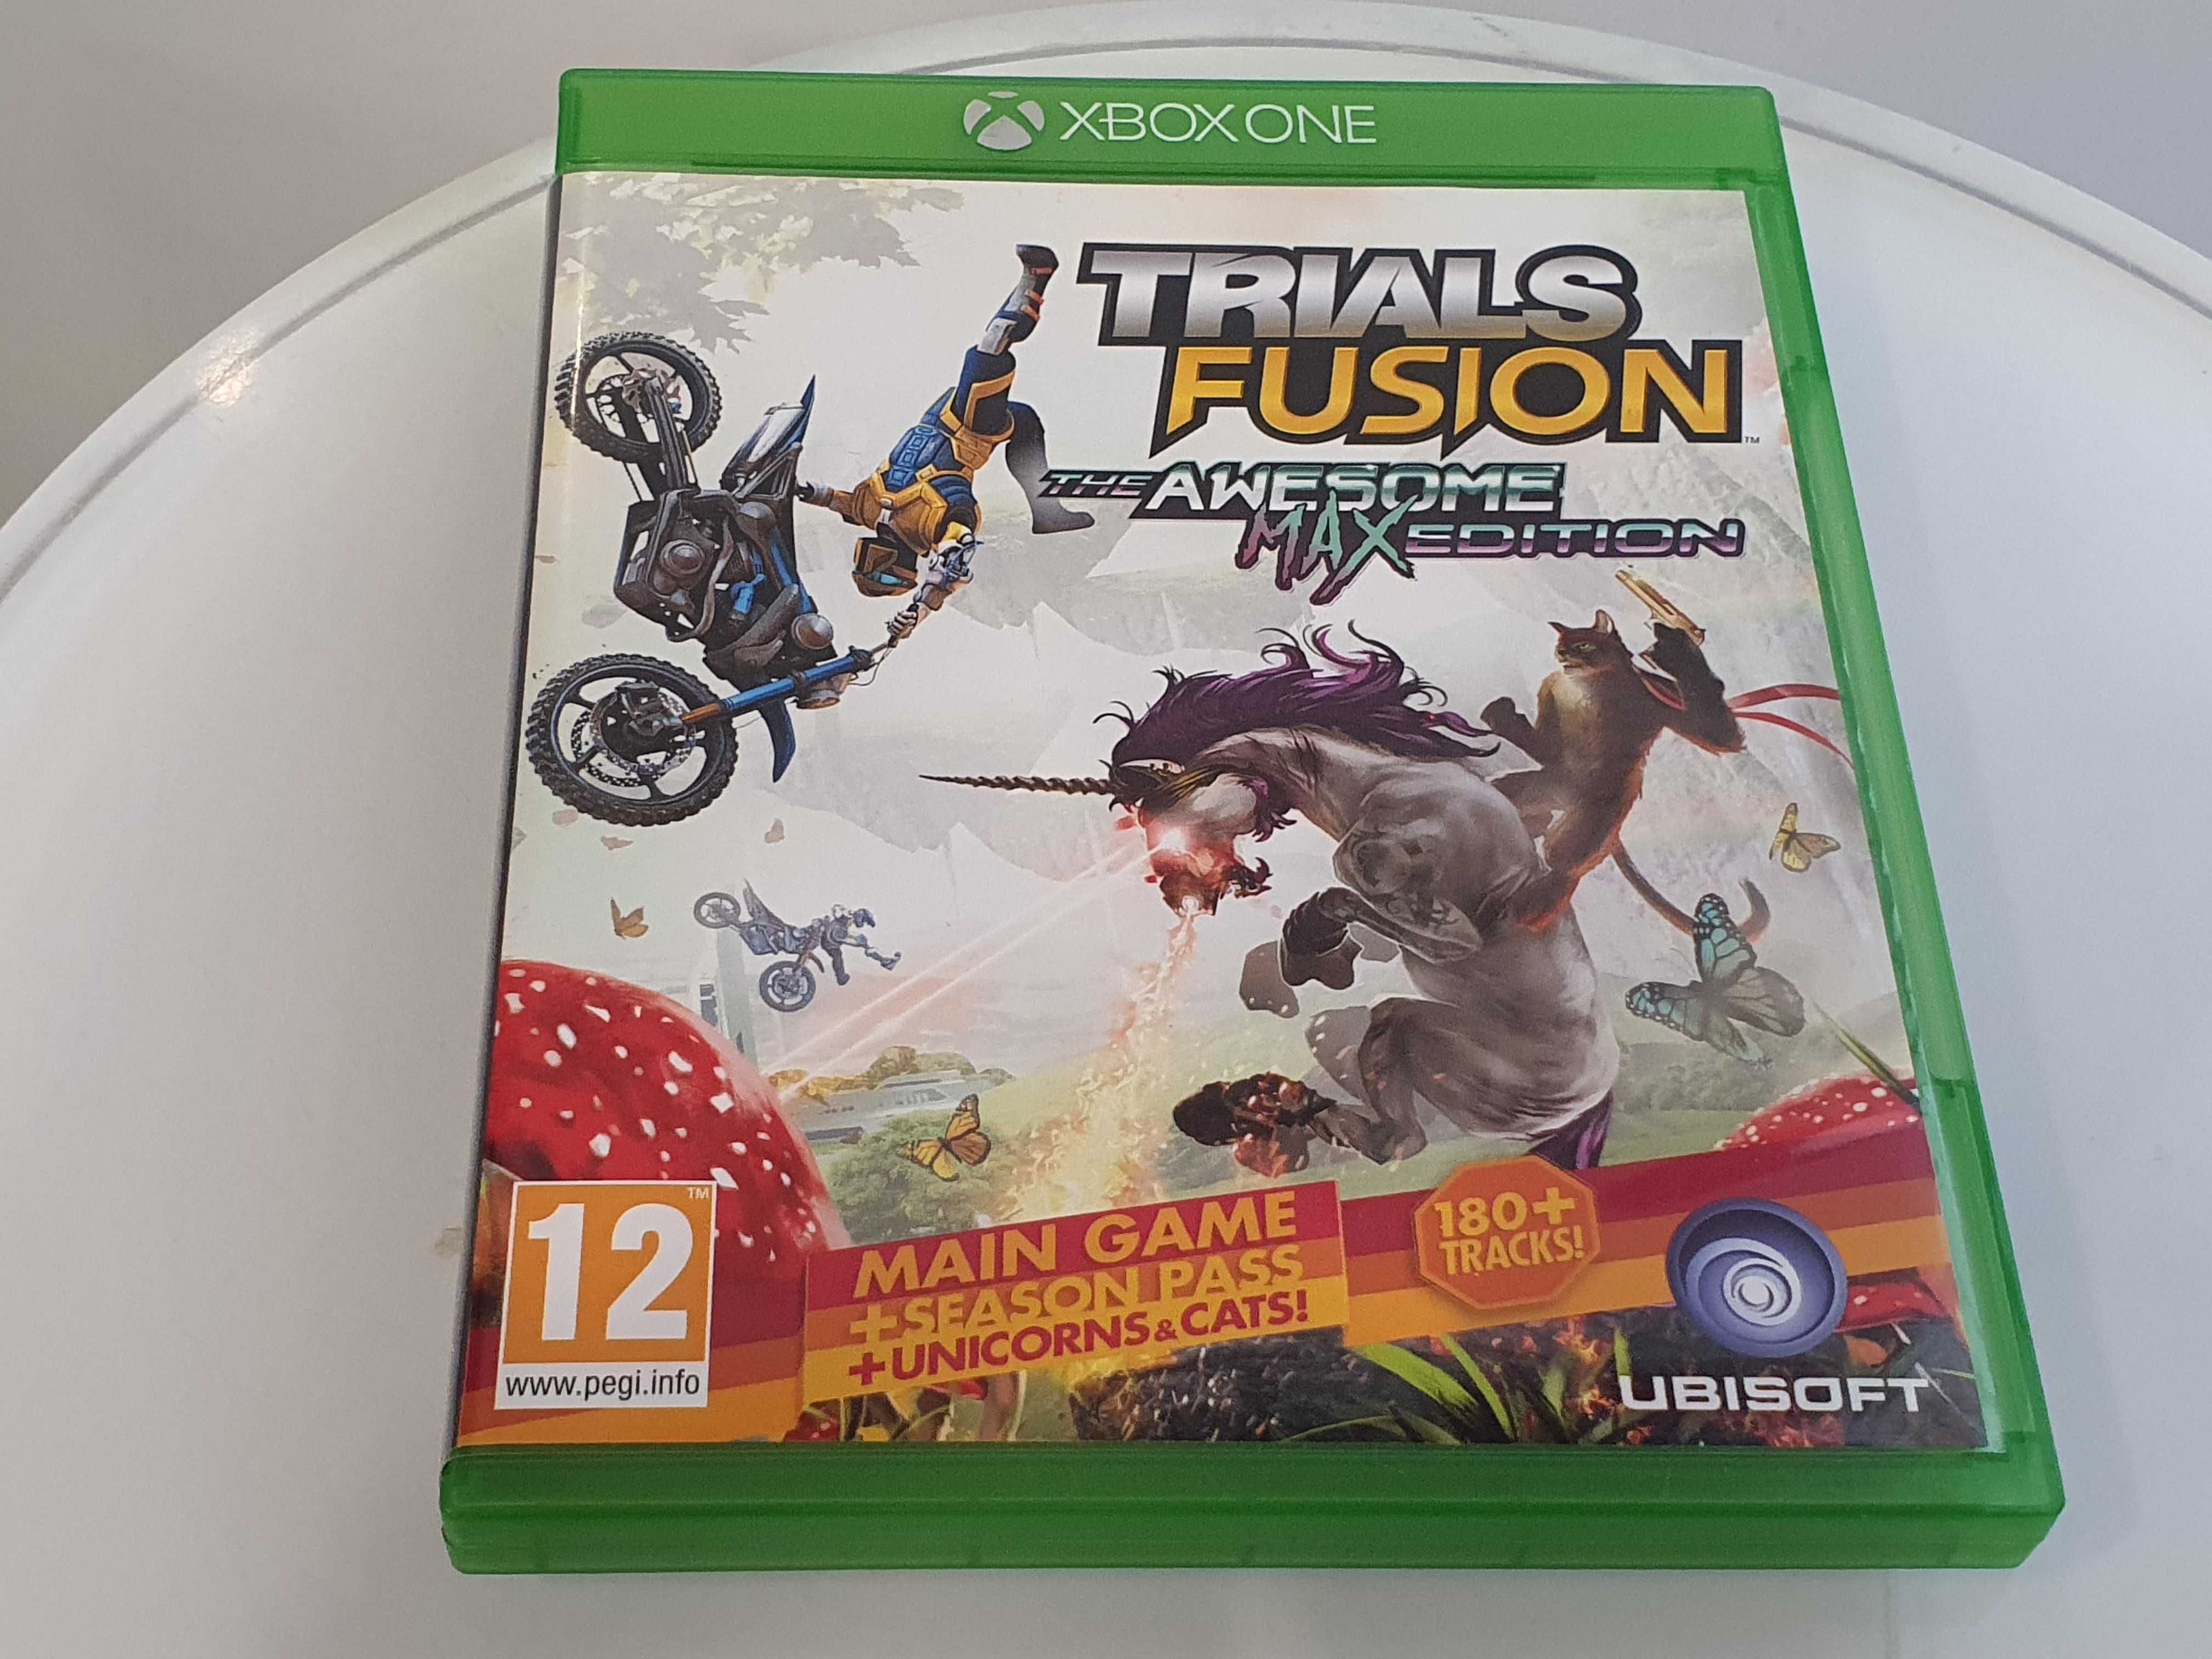 Trials Fursion XBOX The Awesome MAX Edition